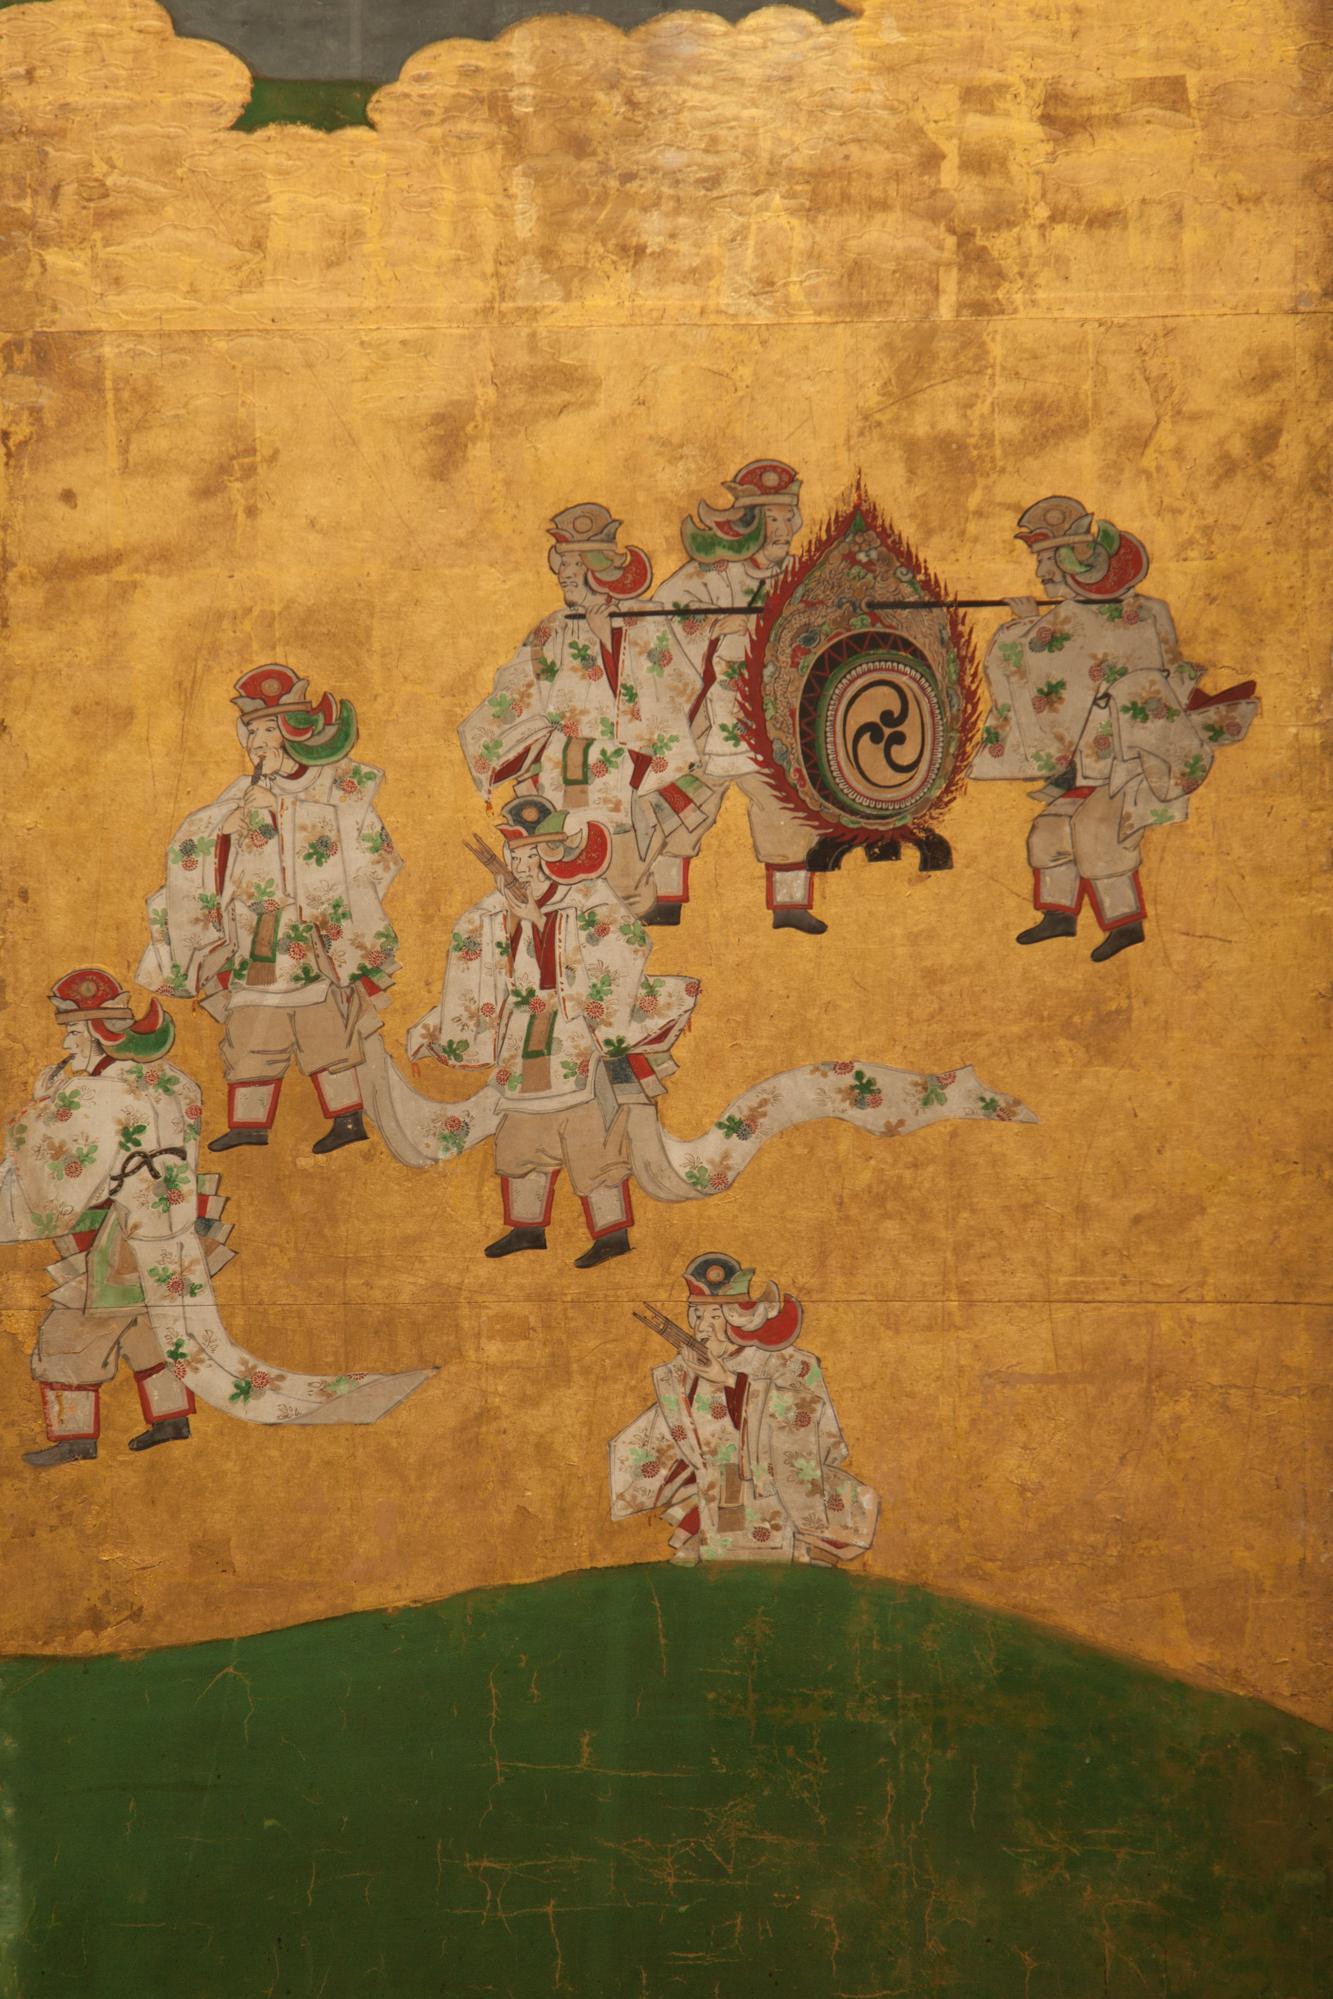 Courtiers are those that are in attendance at a royal court. Beautifuly painted court figures in procession with ancient musical instruments. Tosa School painting in mineral pigments on gold leaf and mulberry paper with silk brocade border.
 